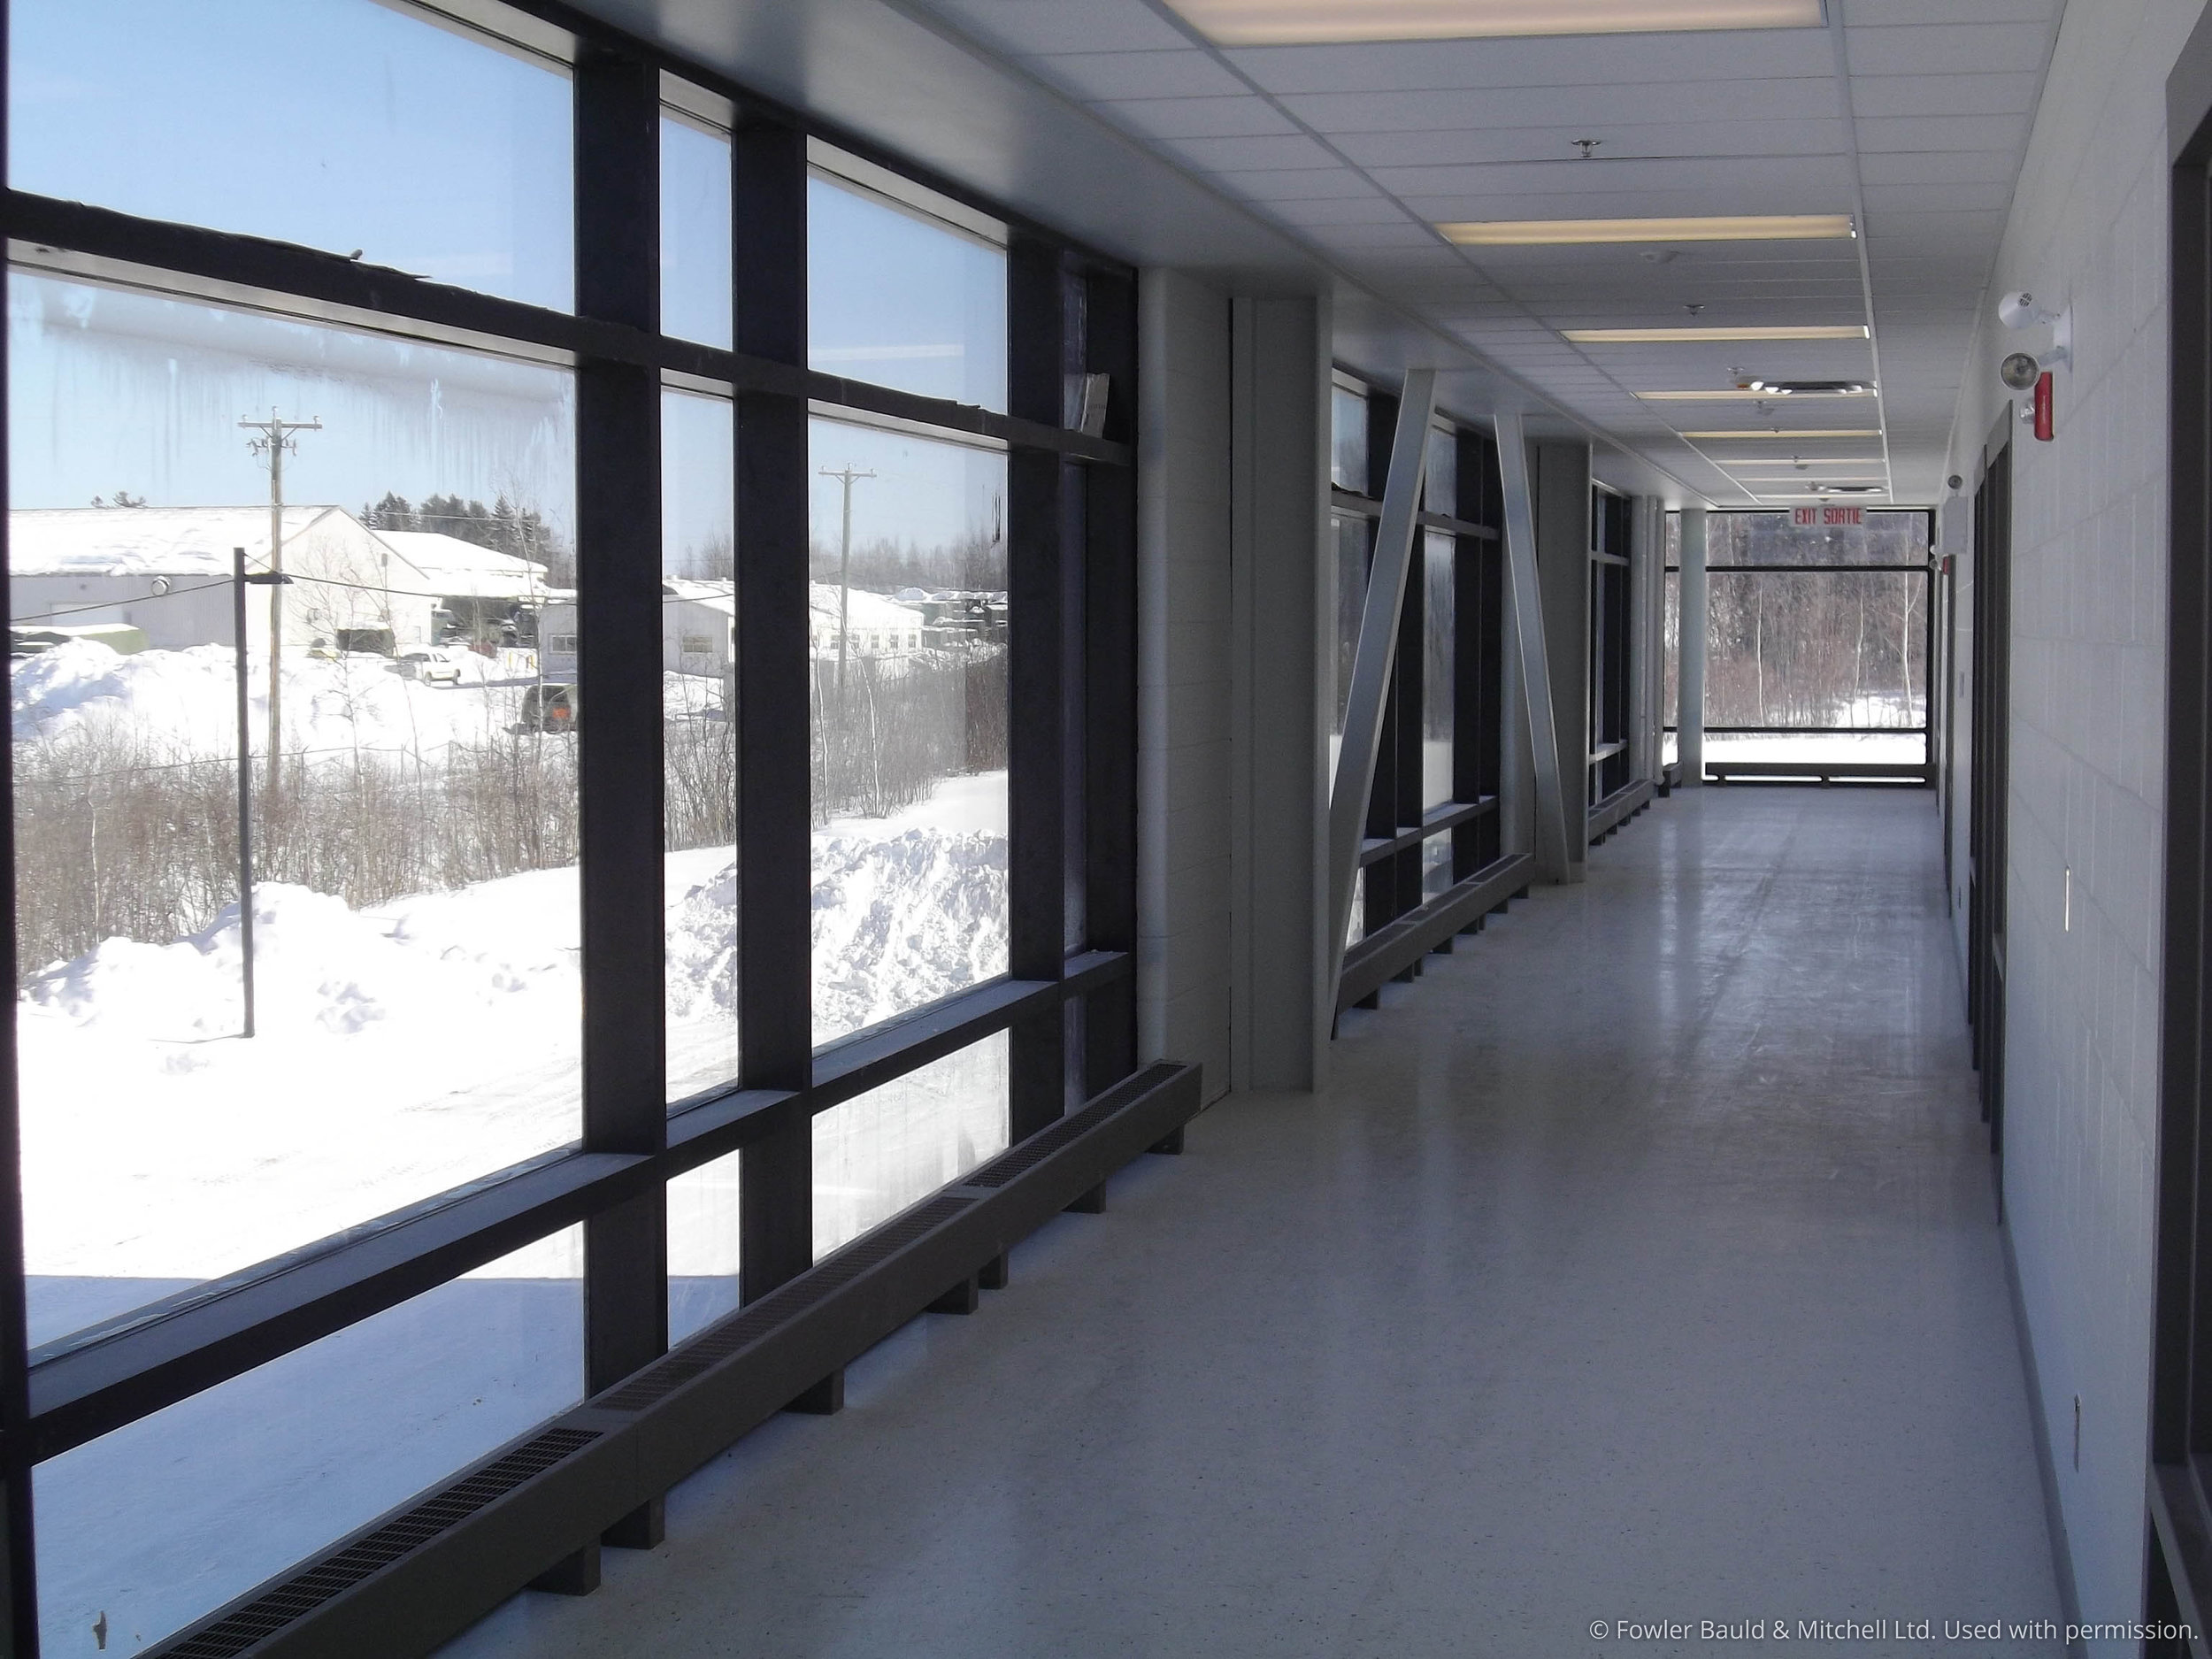 Generous daylight is provided to the corridors serving the classrooms.